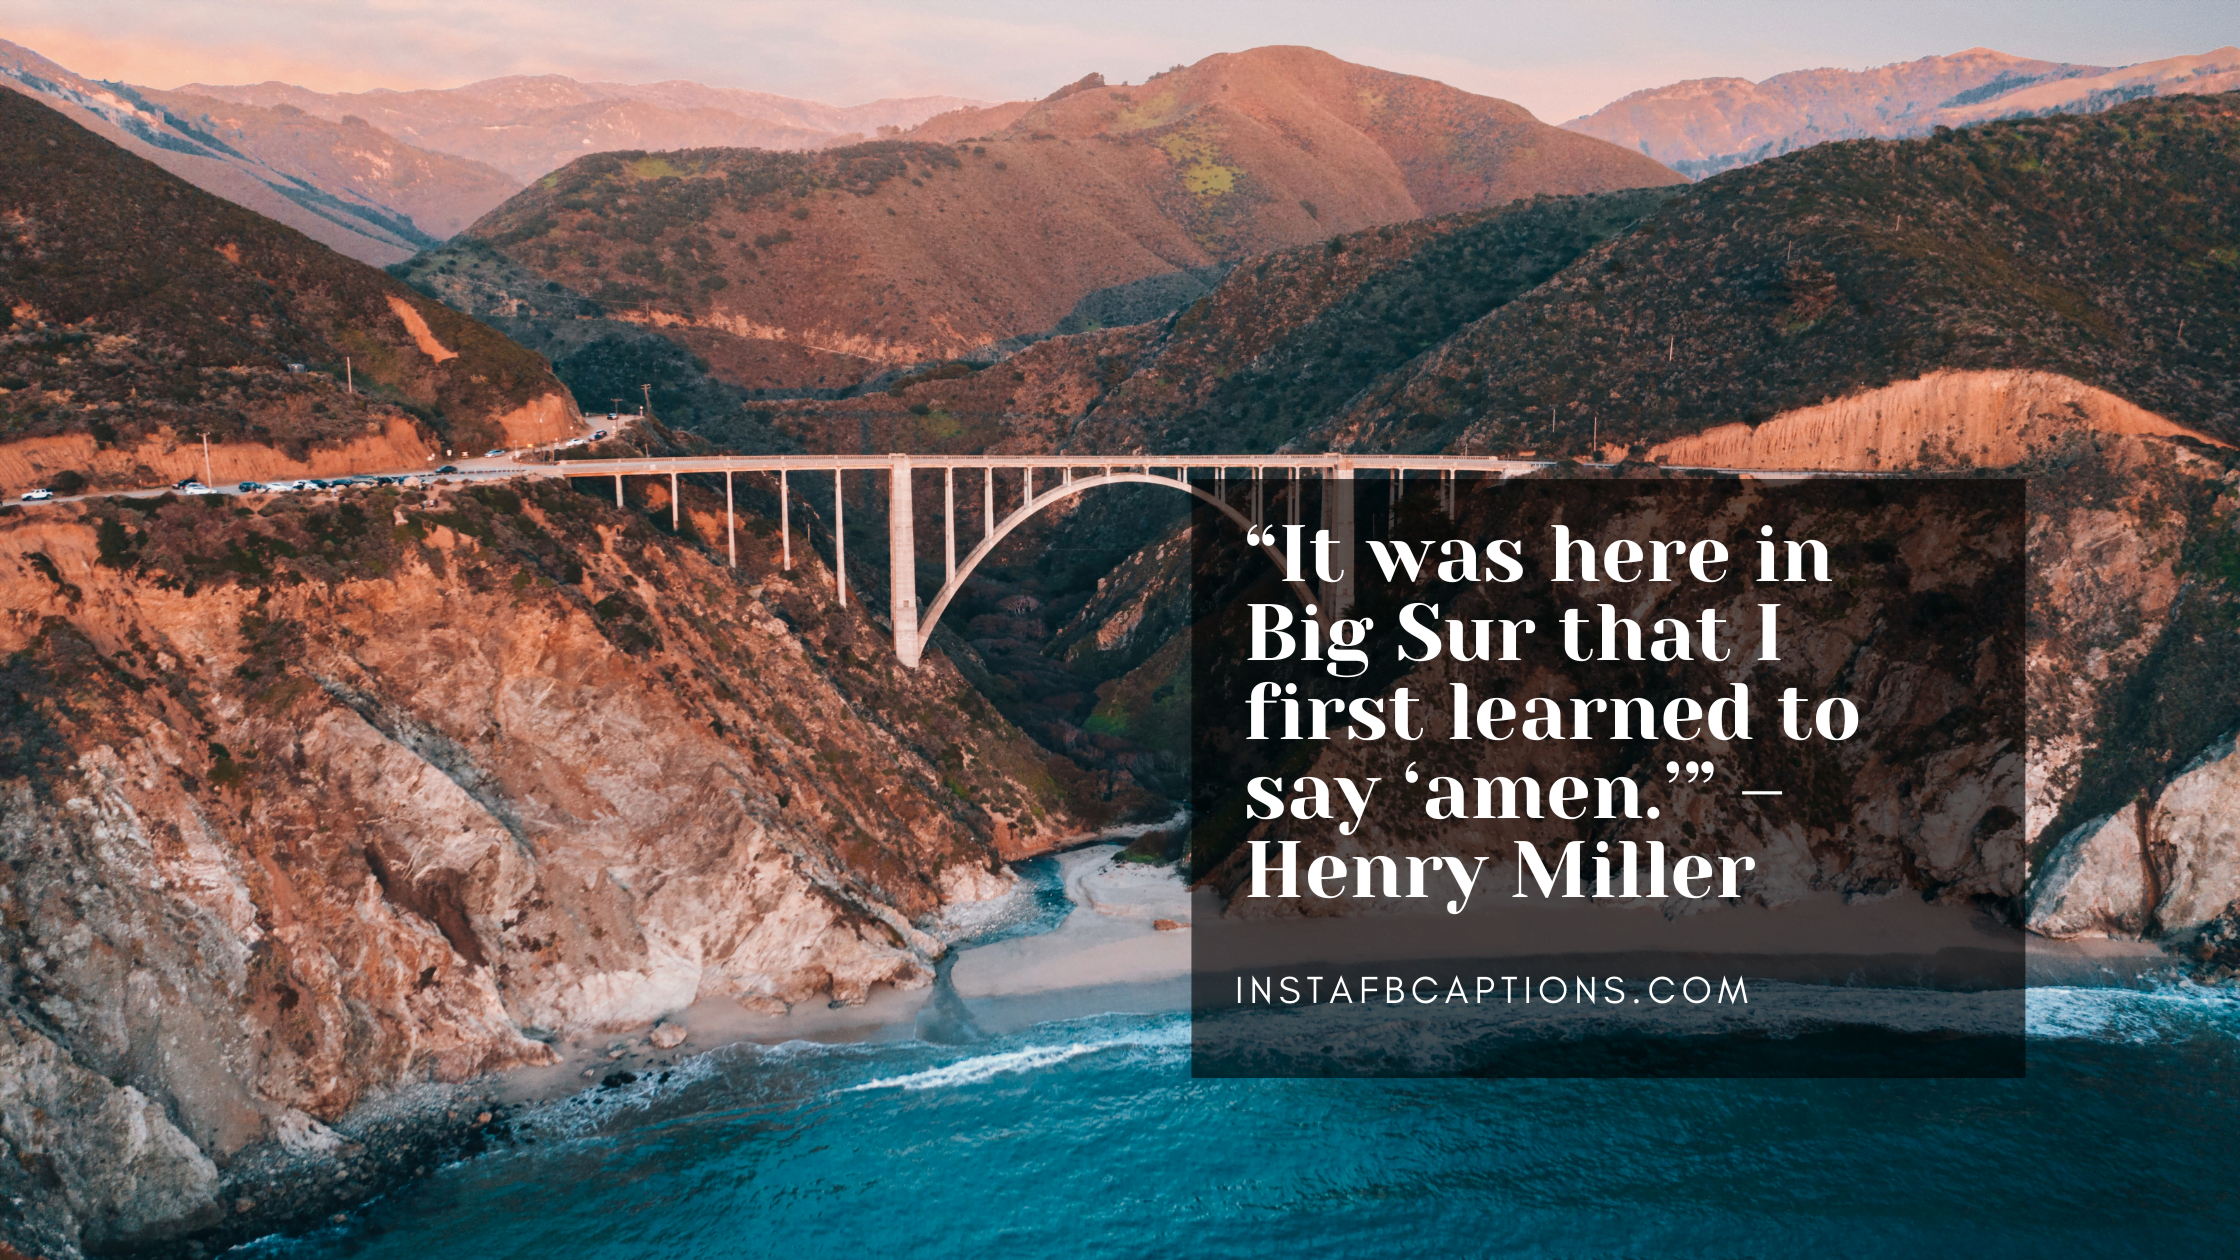 Quotes Related To Big Sur  - Quotes Related to Big Sur - 65 Big Sur Instagram Captions in 2023